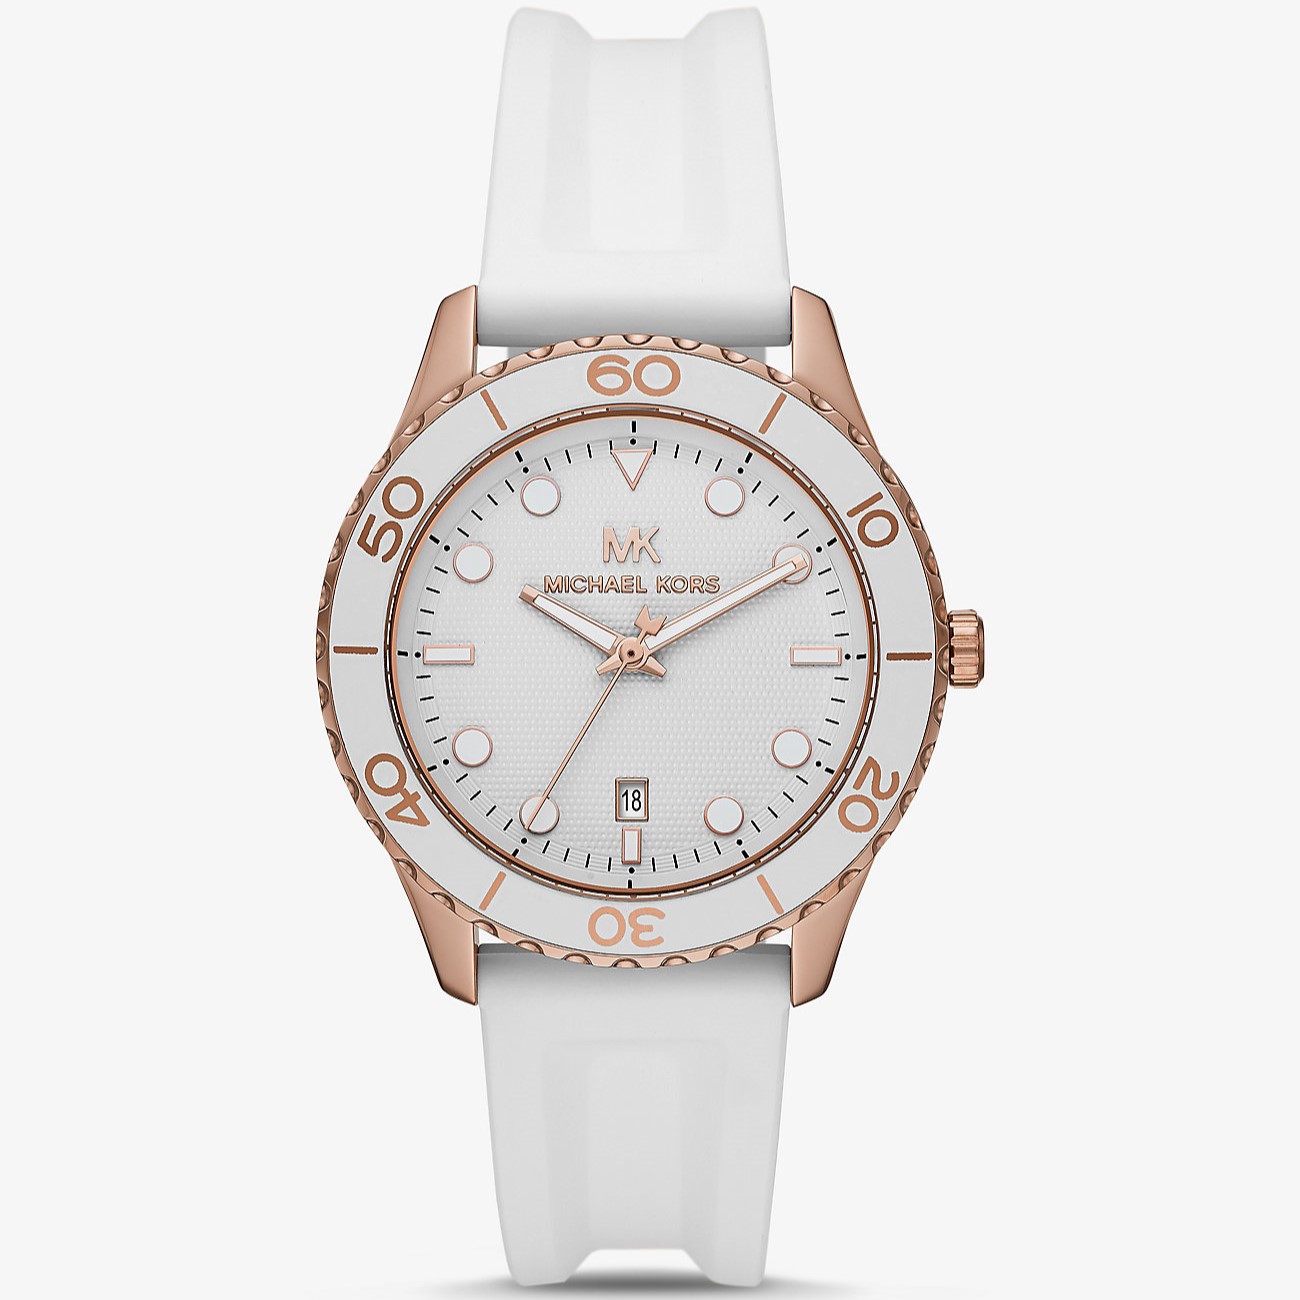 ĐỒNG HỒ MICHAEL KORS RUNWAY DIVE OVERSIZED ROSE GOLD-TONE SILICONE STRAP WATCH MK6853 9